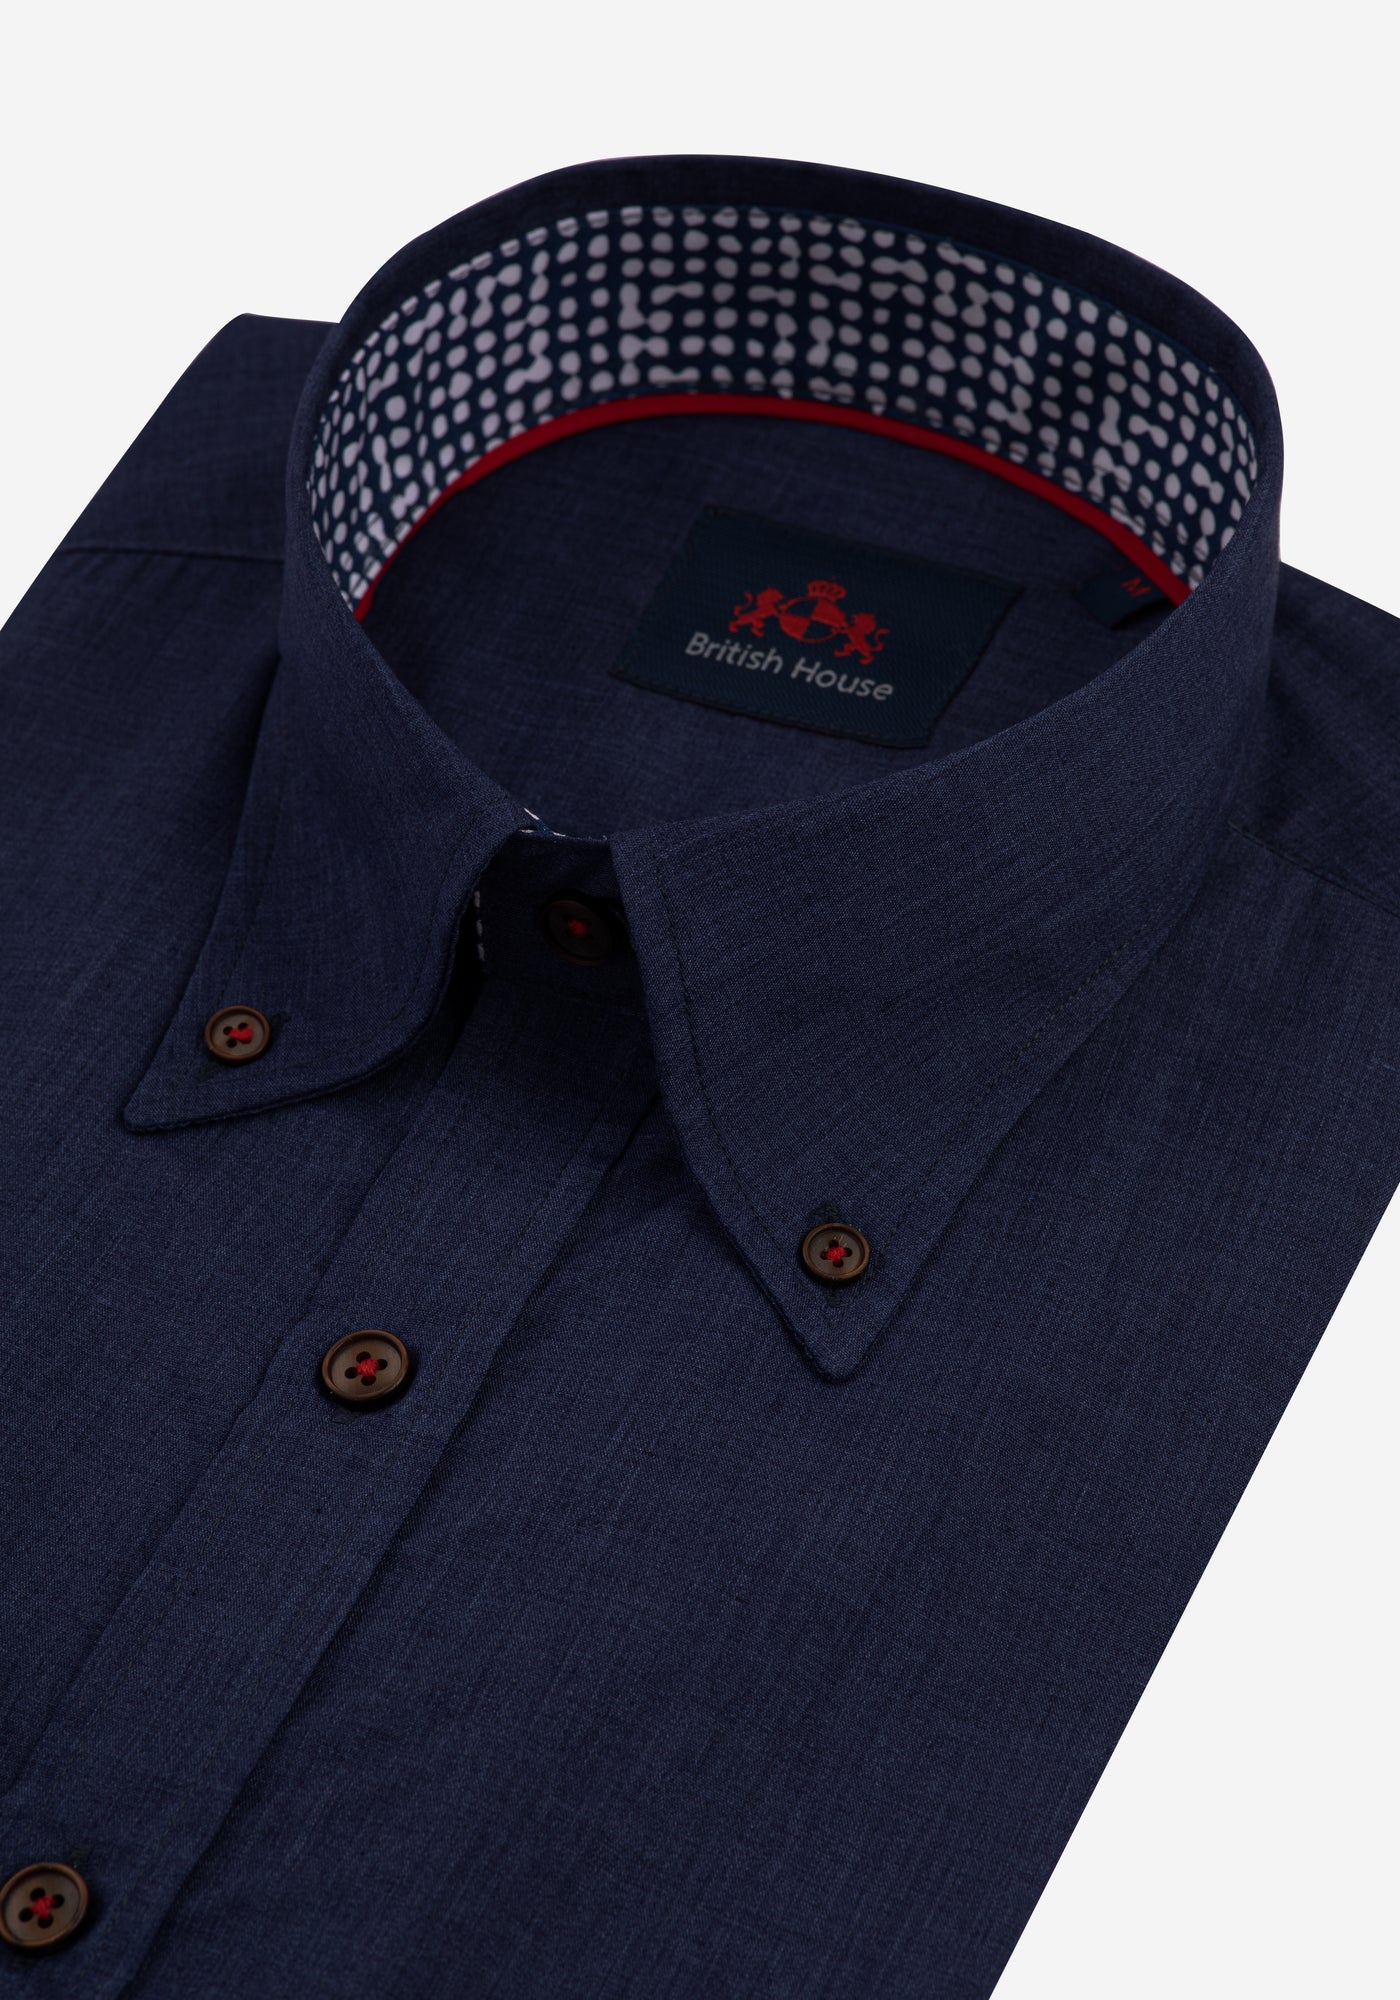 Midnight Blue Chambray Wrinkle Free Shirt